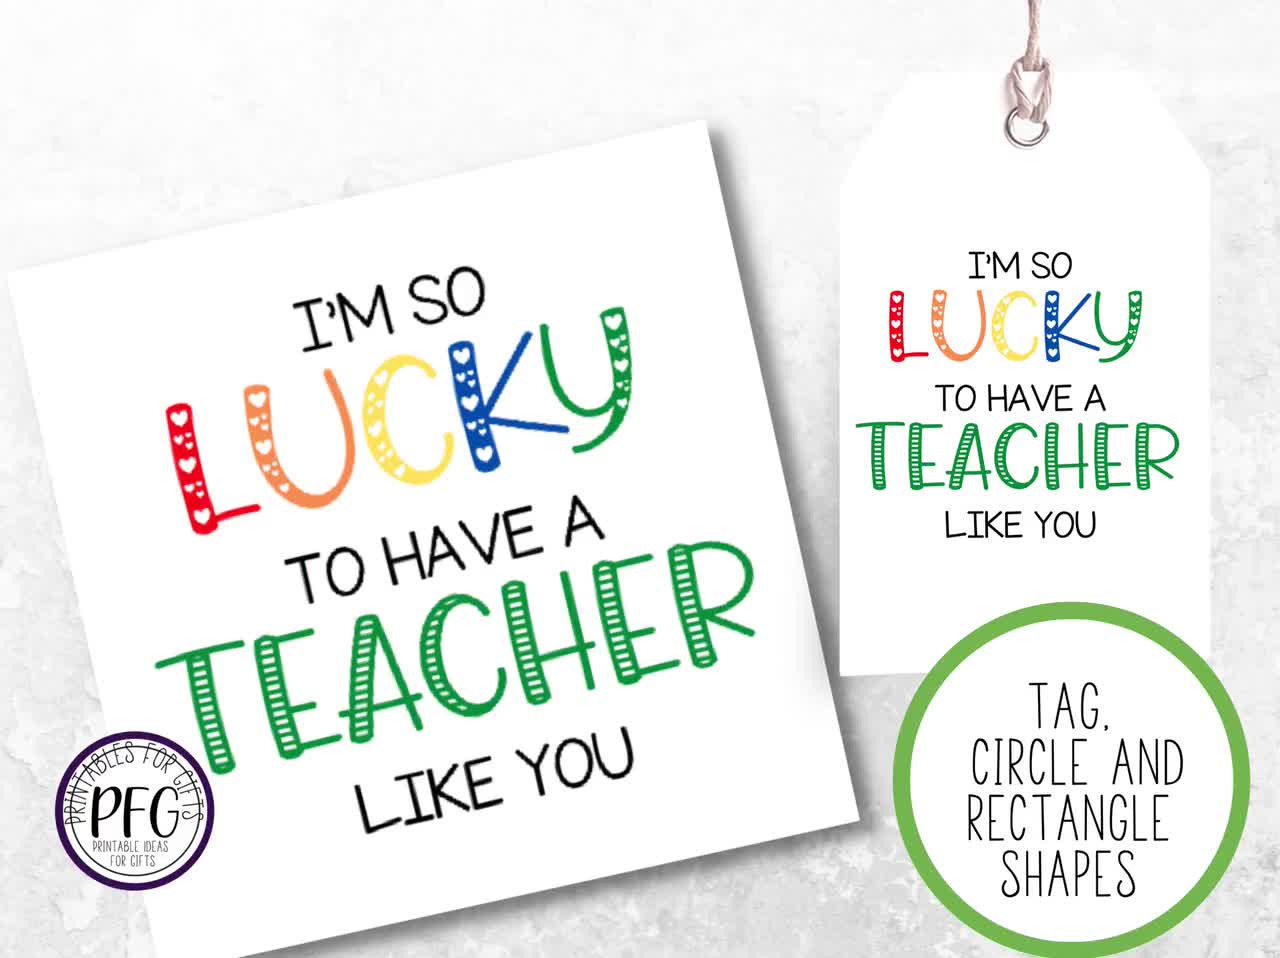 15 of the Best Cheap Teacher Gifts - Thrifty Frugal Mom